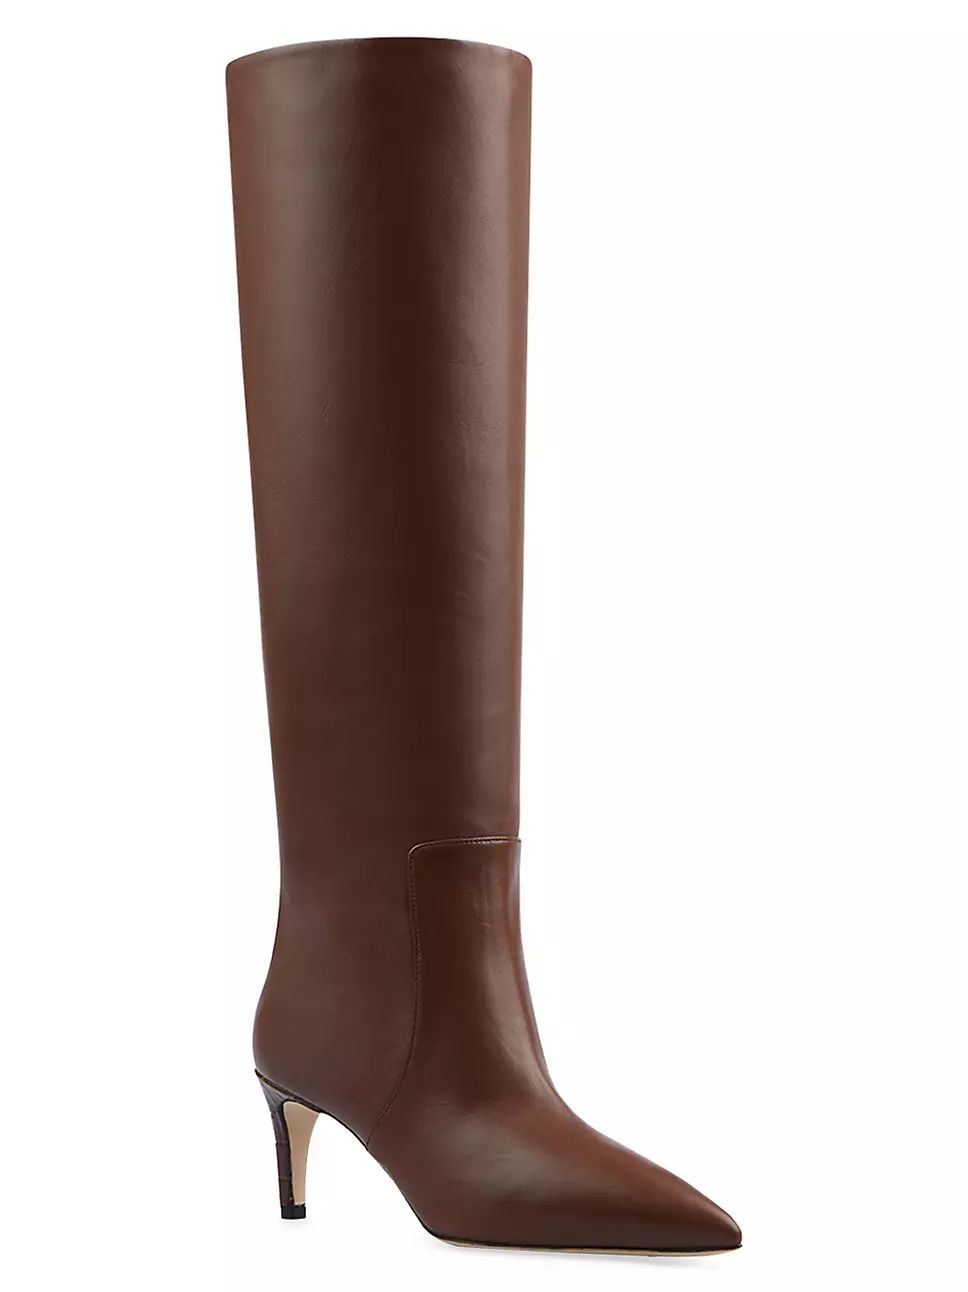 Knee-High Leather Stiletto Boots | Saks Fifth Avenue